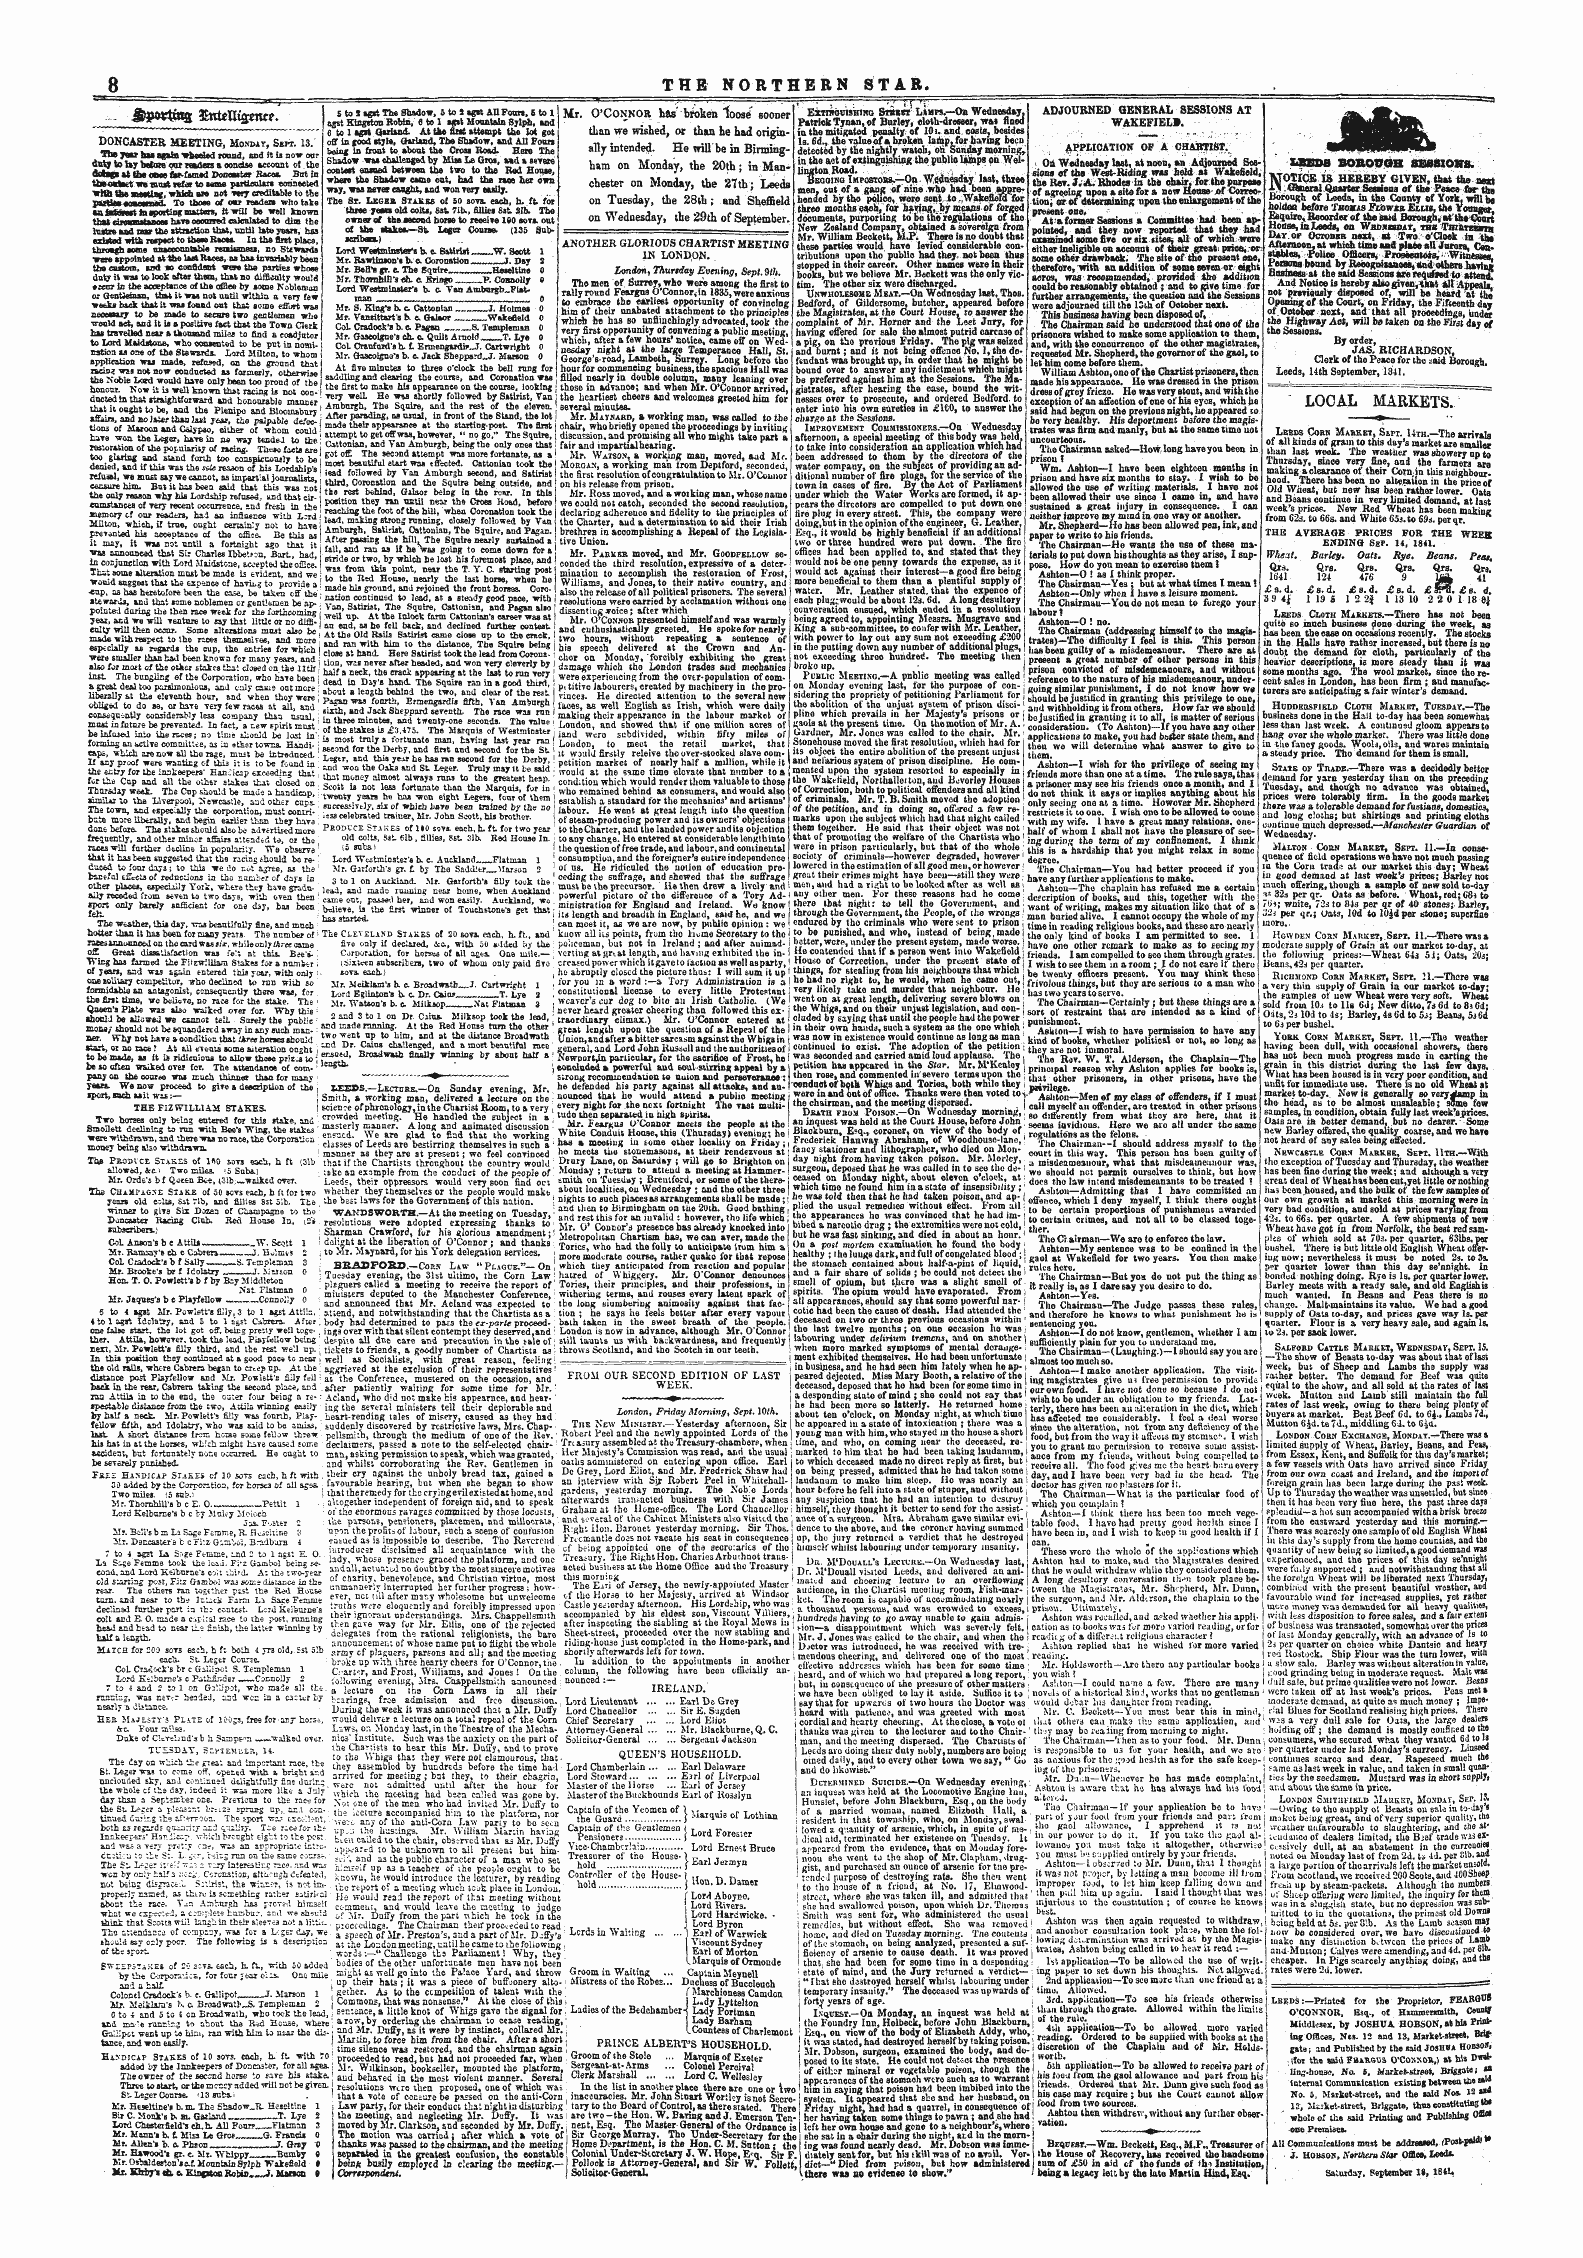 Northern Star 17 1852 18th September 1841 Edition 1 Of 5 Page 8 Local Markets Nineteenth Century Serials Edition